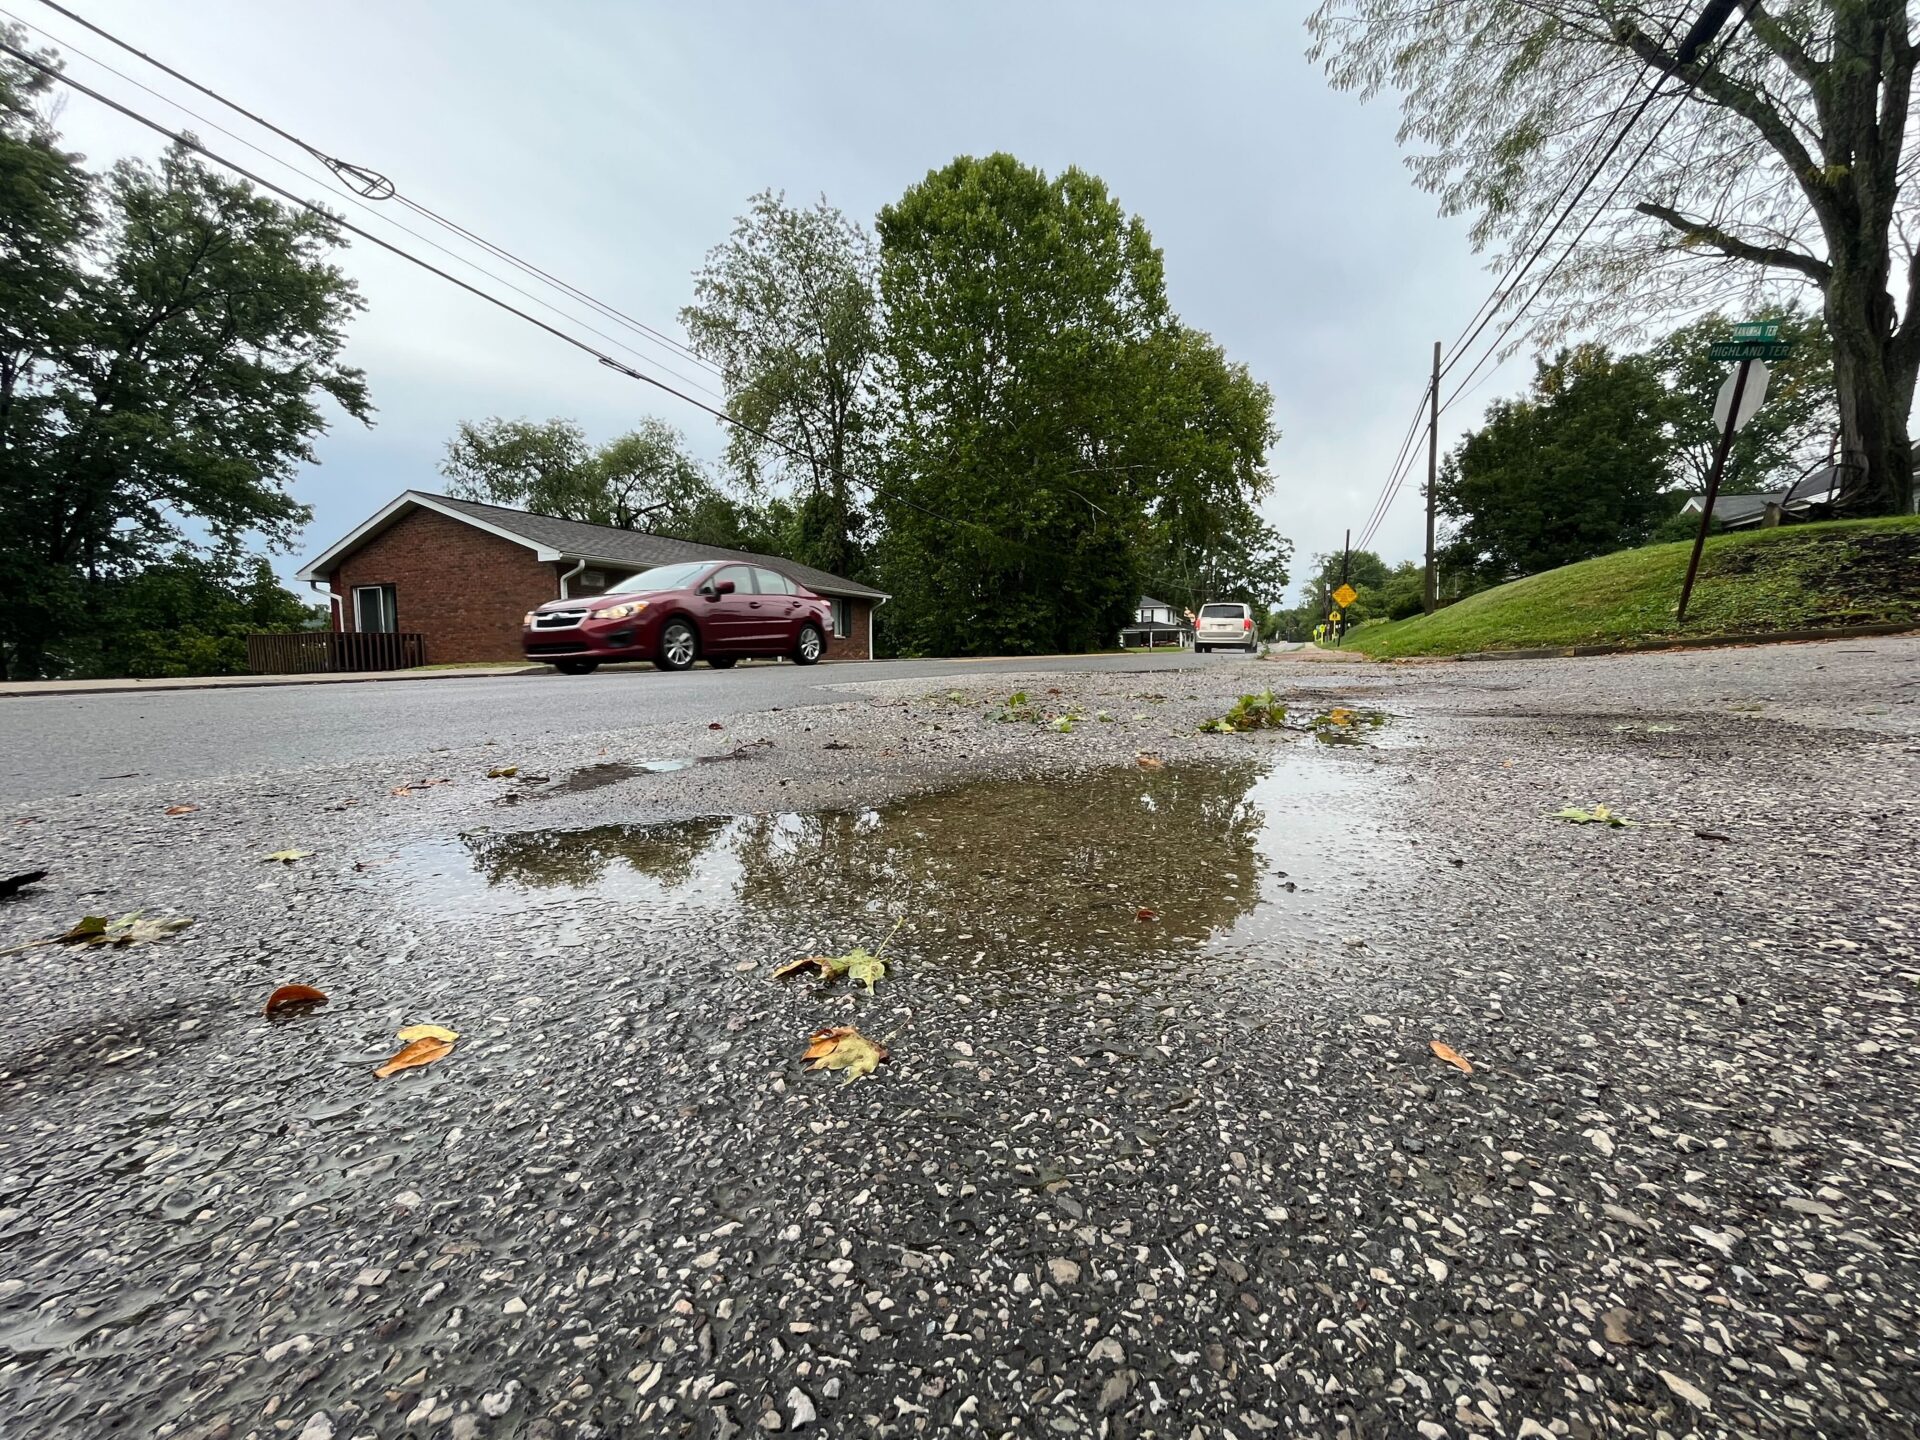 A car drives over wet pavement after a severe summer storm under gloomy skies.